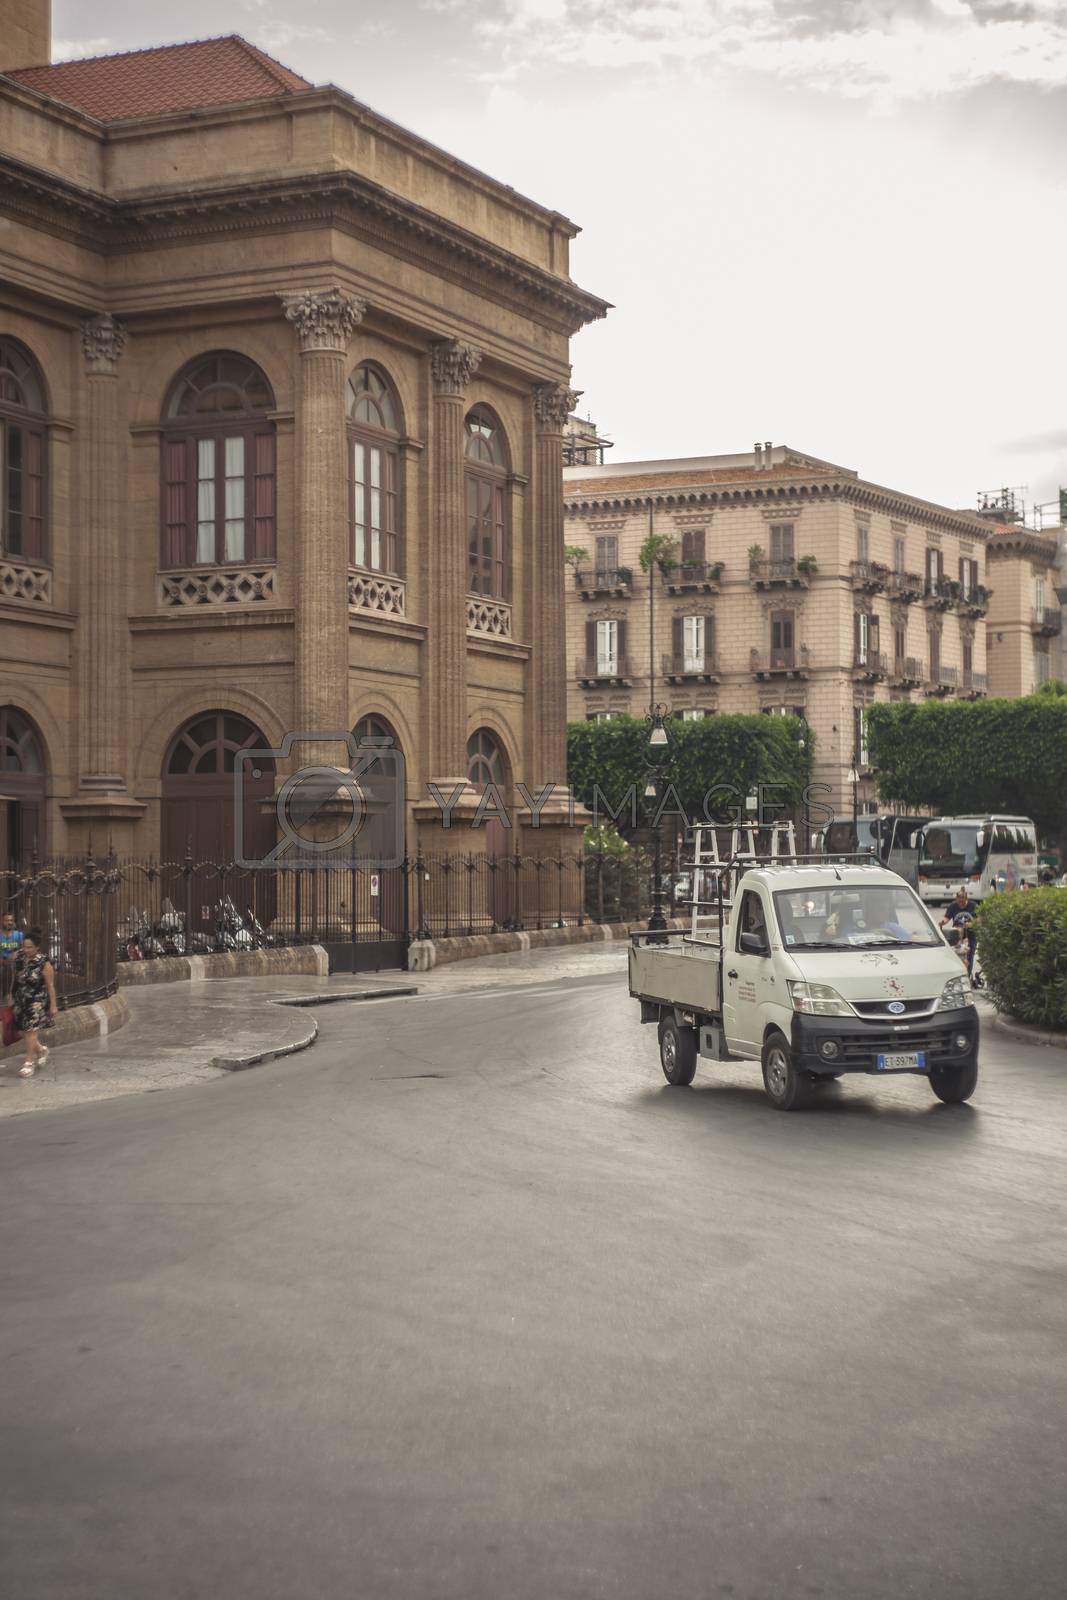 Royalty free image of Teatro Massimo in Palermo #7 by pippocarlot